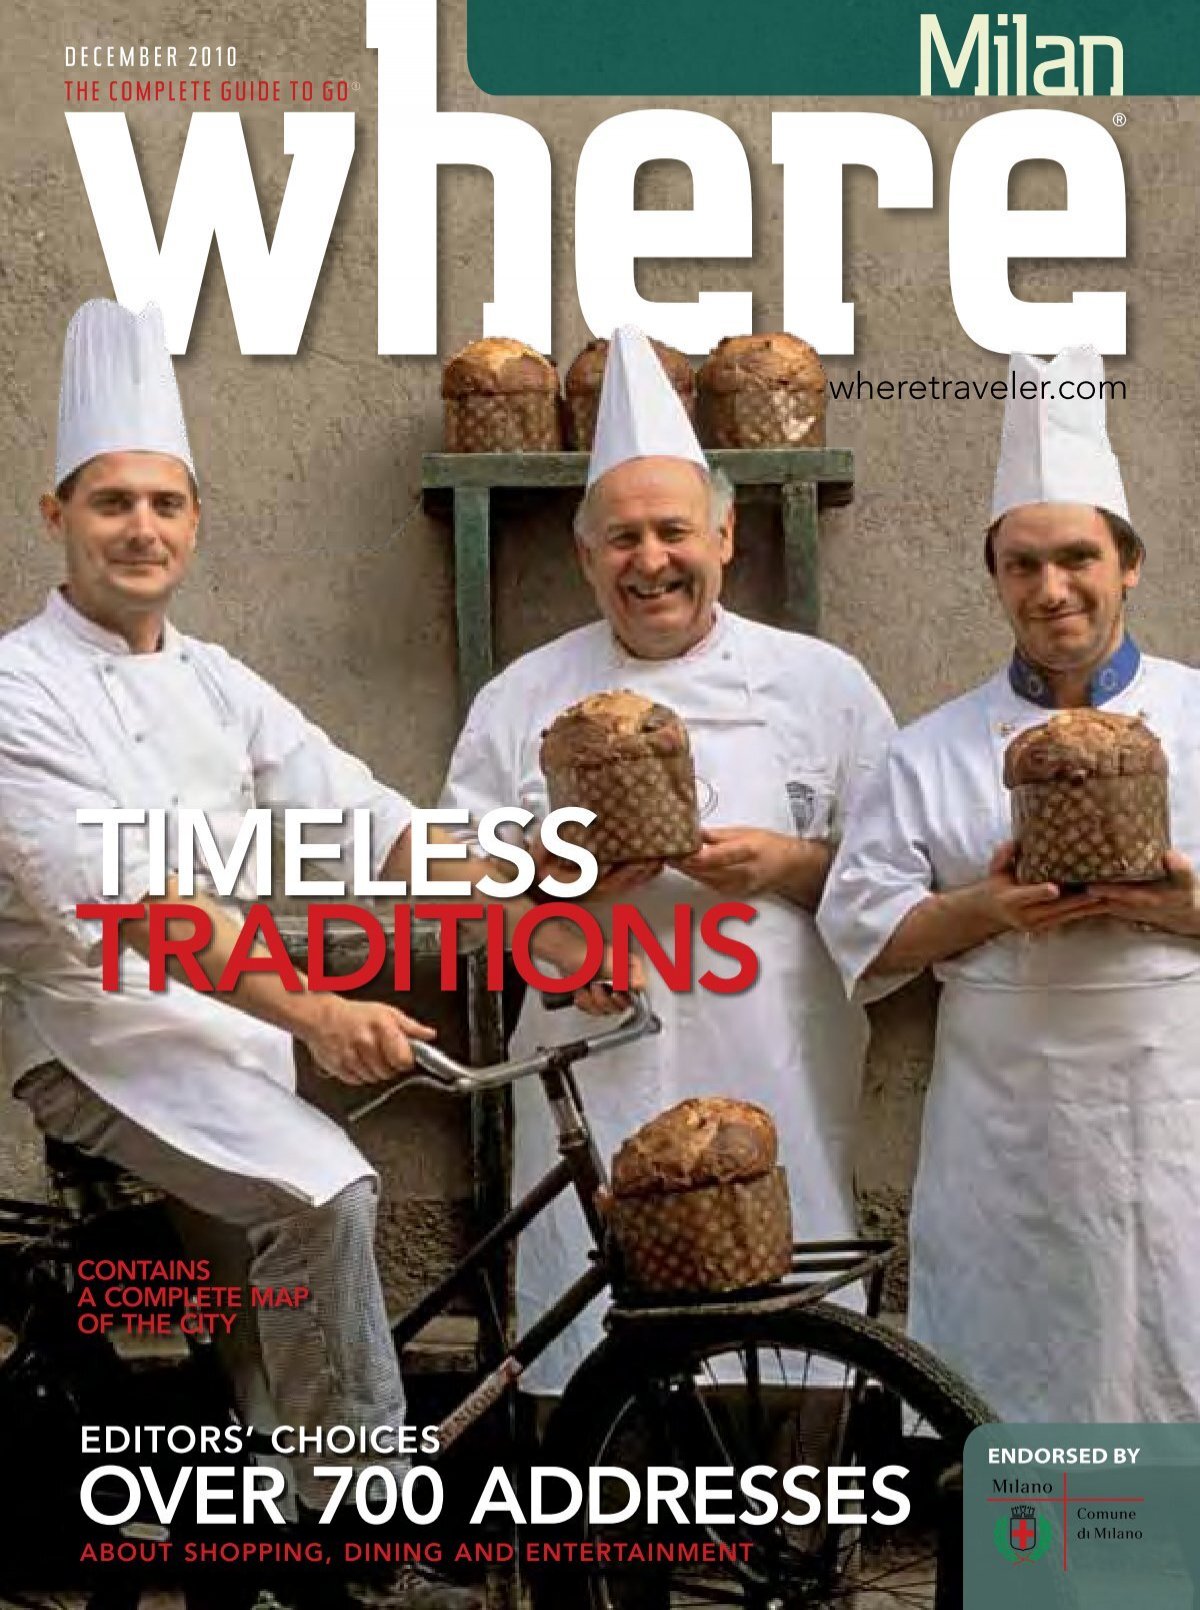 TimElESS TrADiTiOnS - Where Milan